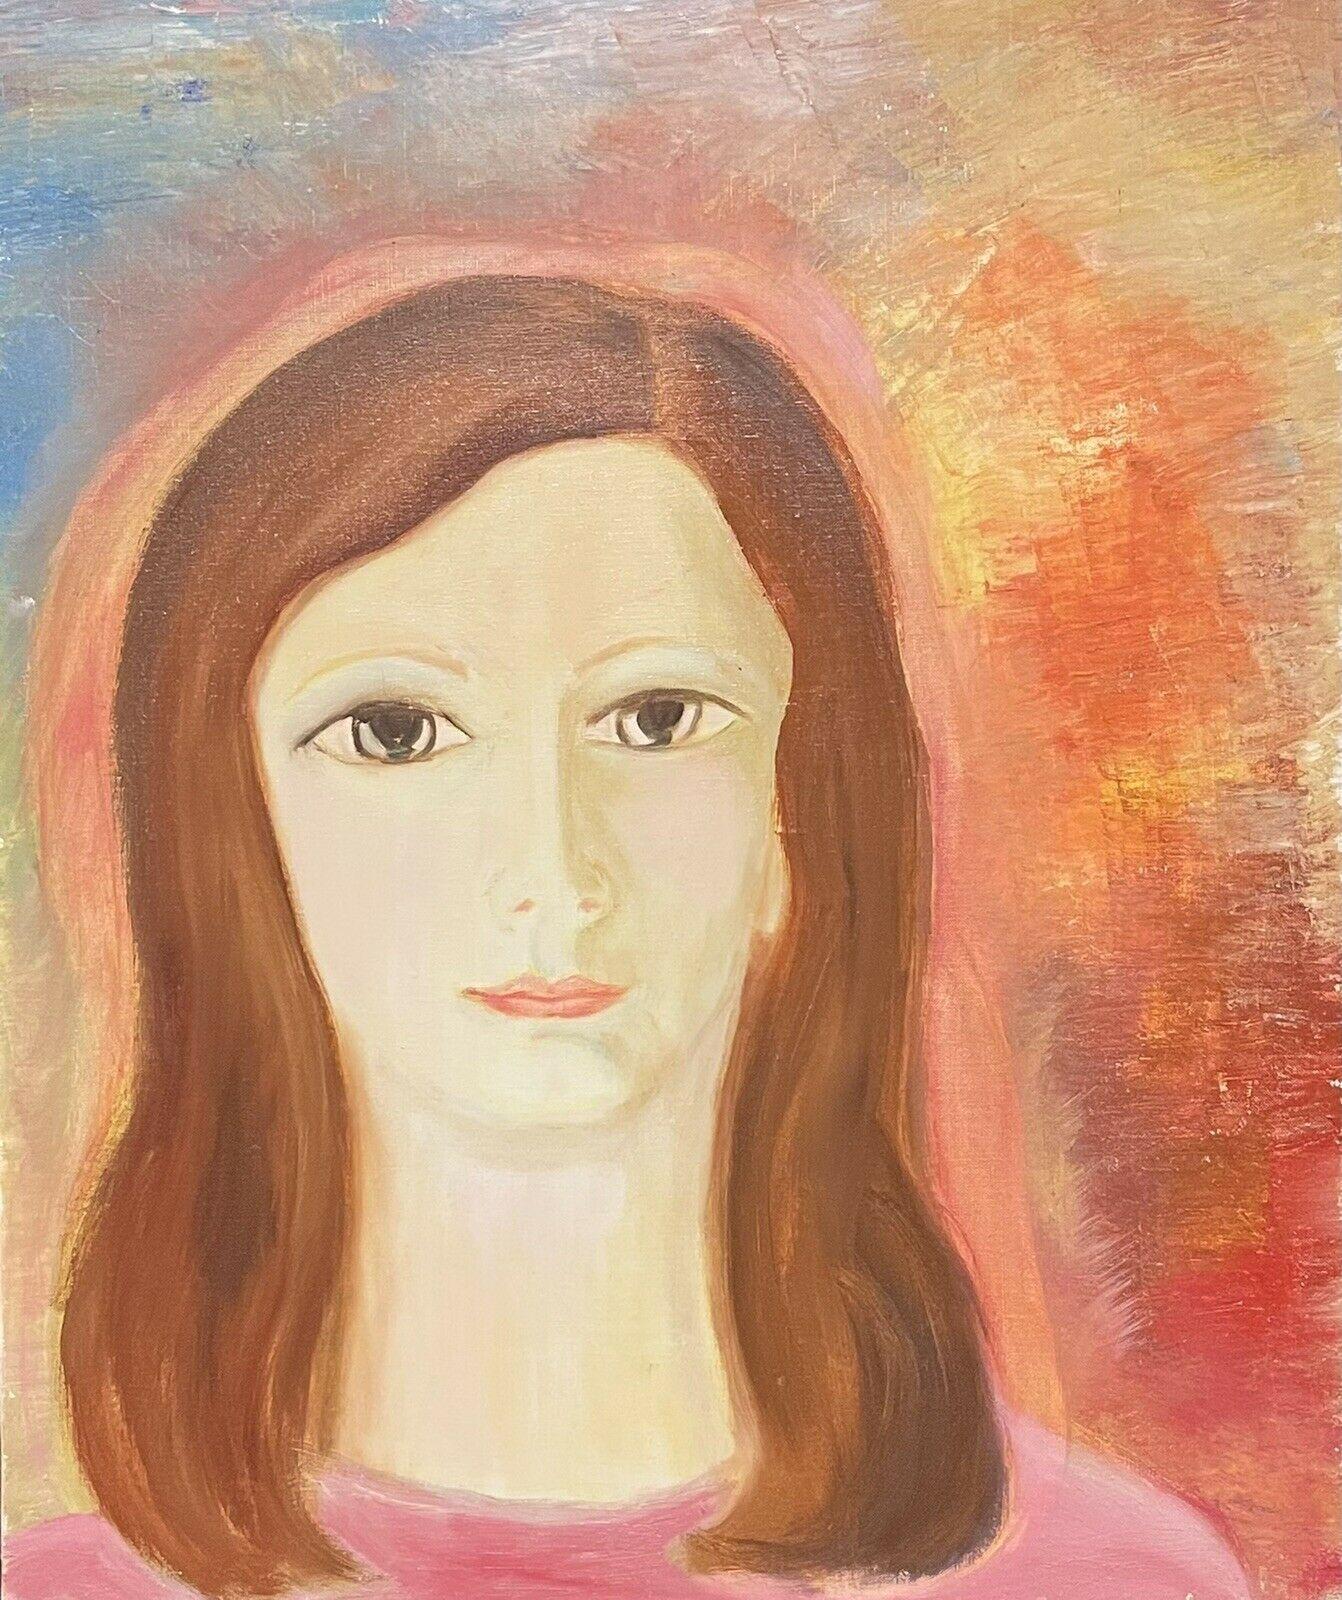 French artist Interior Painting - 1970's FRENCH OIL PAINTING - HEAD & SHOULDERS PORTRAIT YOUNG LADY PINK & ORANGE